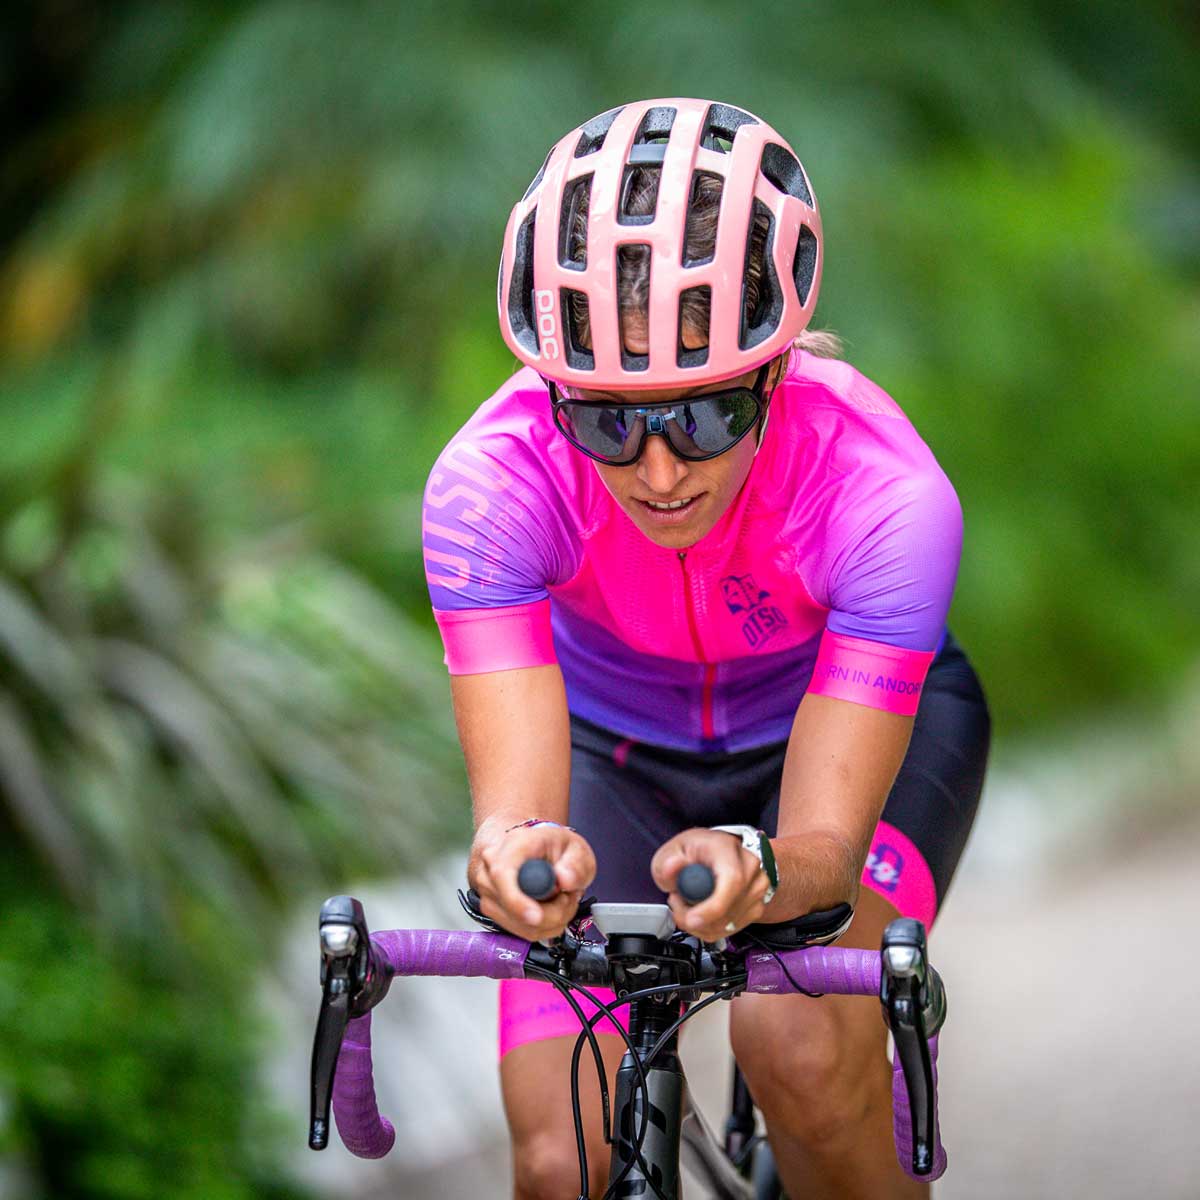 Women's Cycling Jersey Fluo Pink